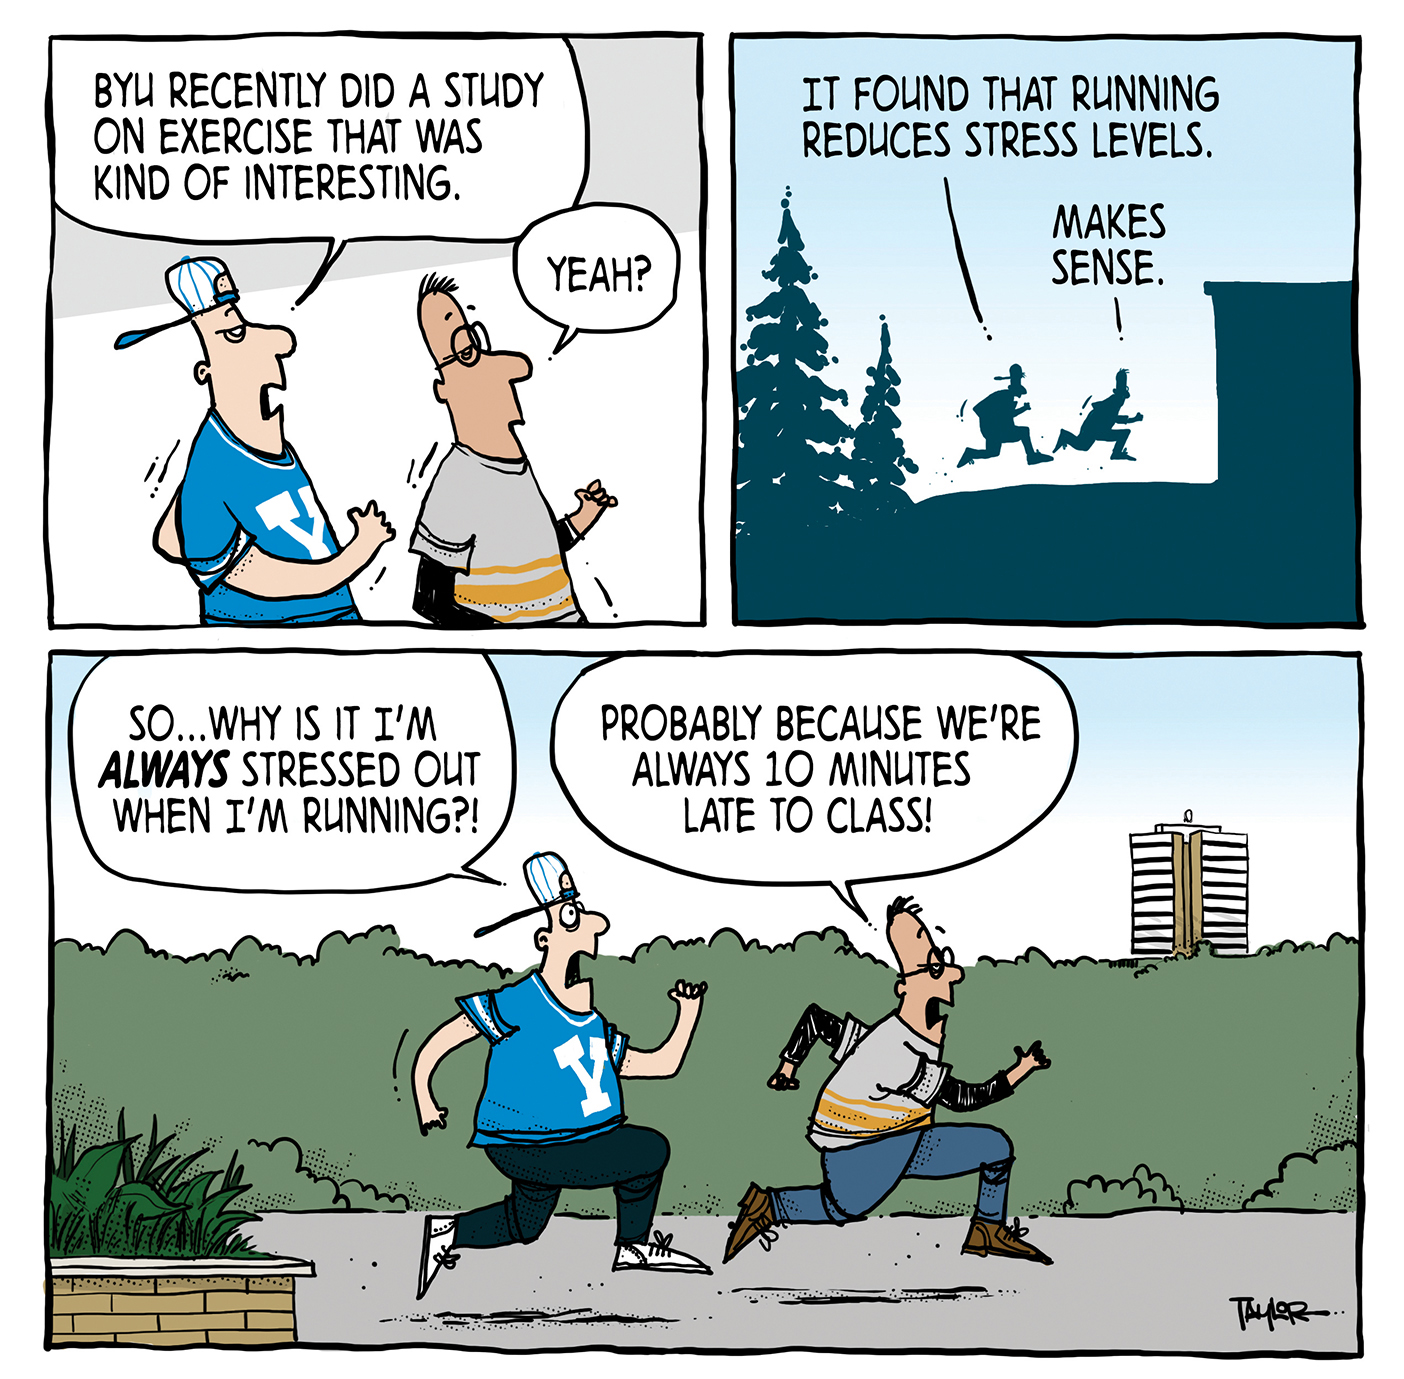 A comic strip showing students running. One points out that a new BYU study showed running reduces stress. The other asks, "Then why is it I"m always stressed out when I'm running?" The punchline: "Probably because we're always 10 minutes late to class!"